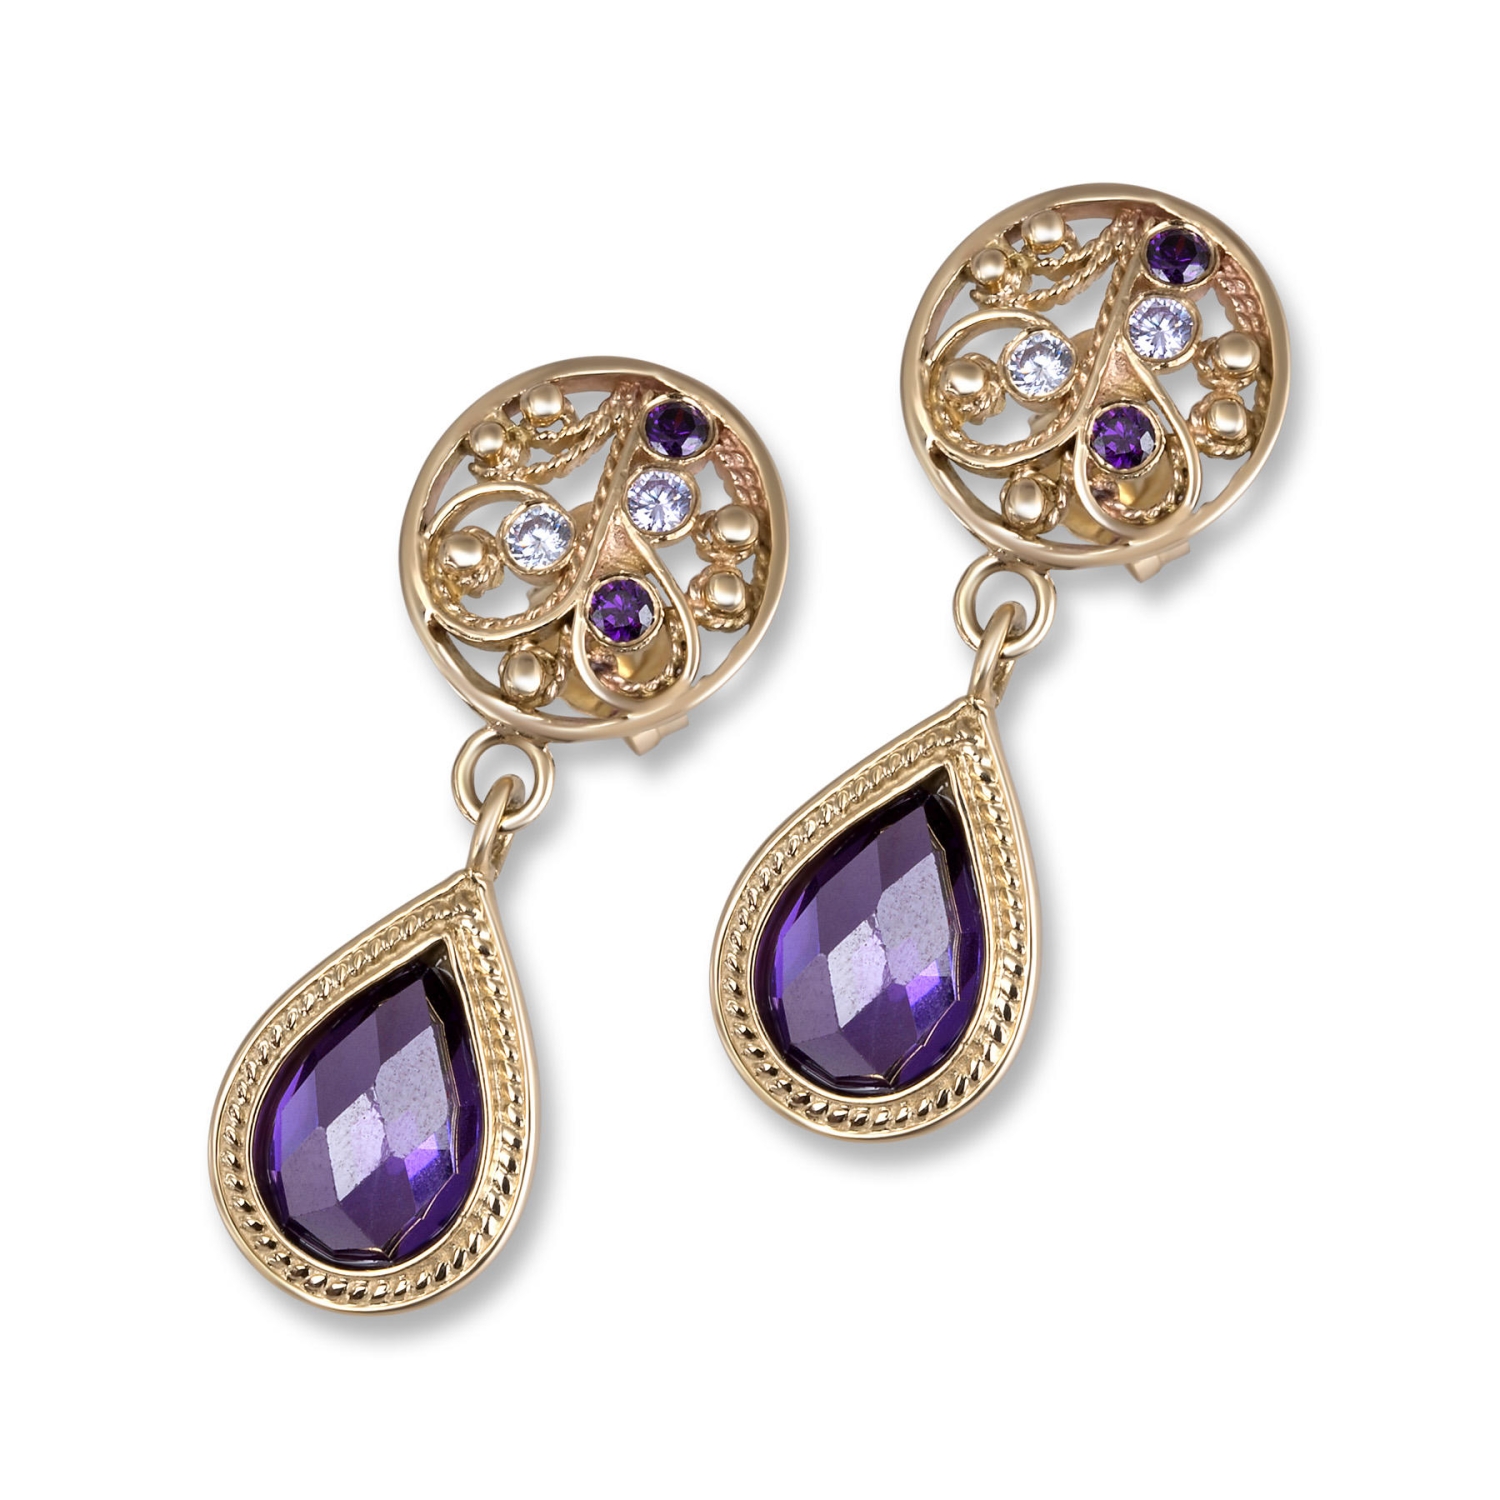 14K Yellow Gold Filigree Teardrop Earrings with Amethysts and Lavender Stones - 1